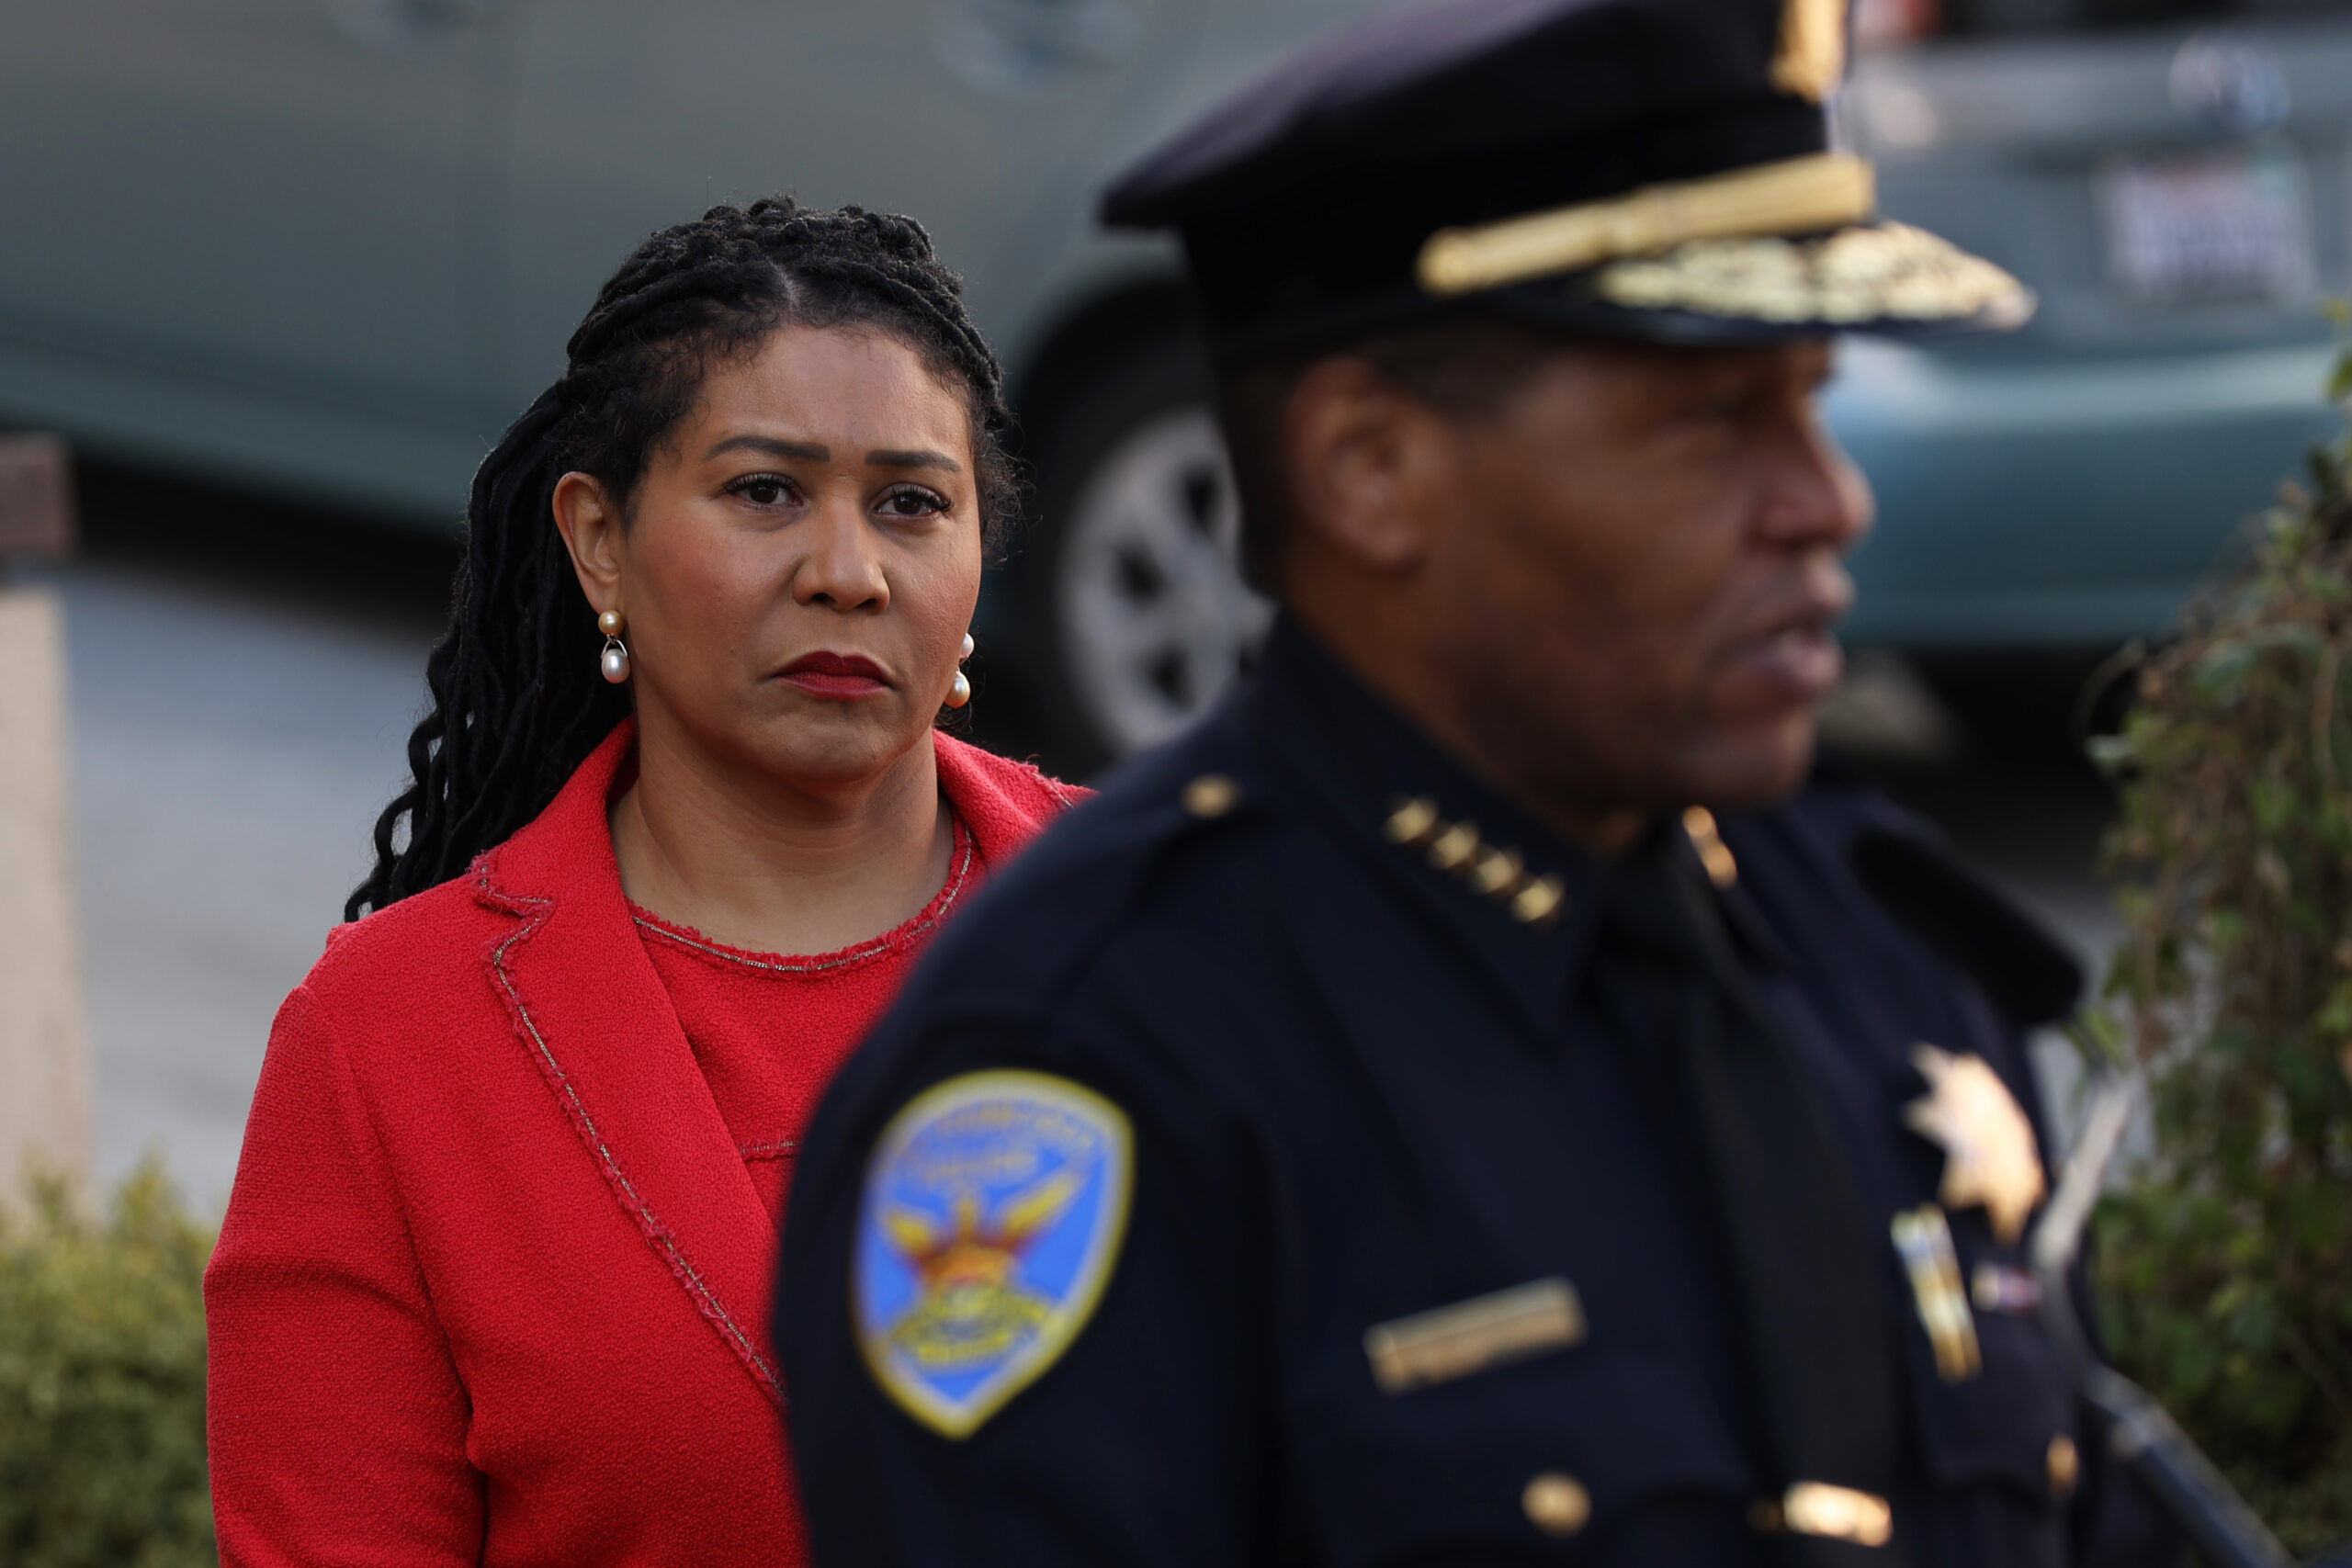 Police Cameras, Chases and Drones: Mayor London Breed Announces 2024 Ballot Measure To Fight Crime